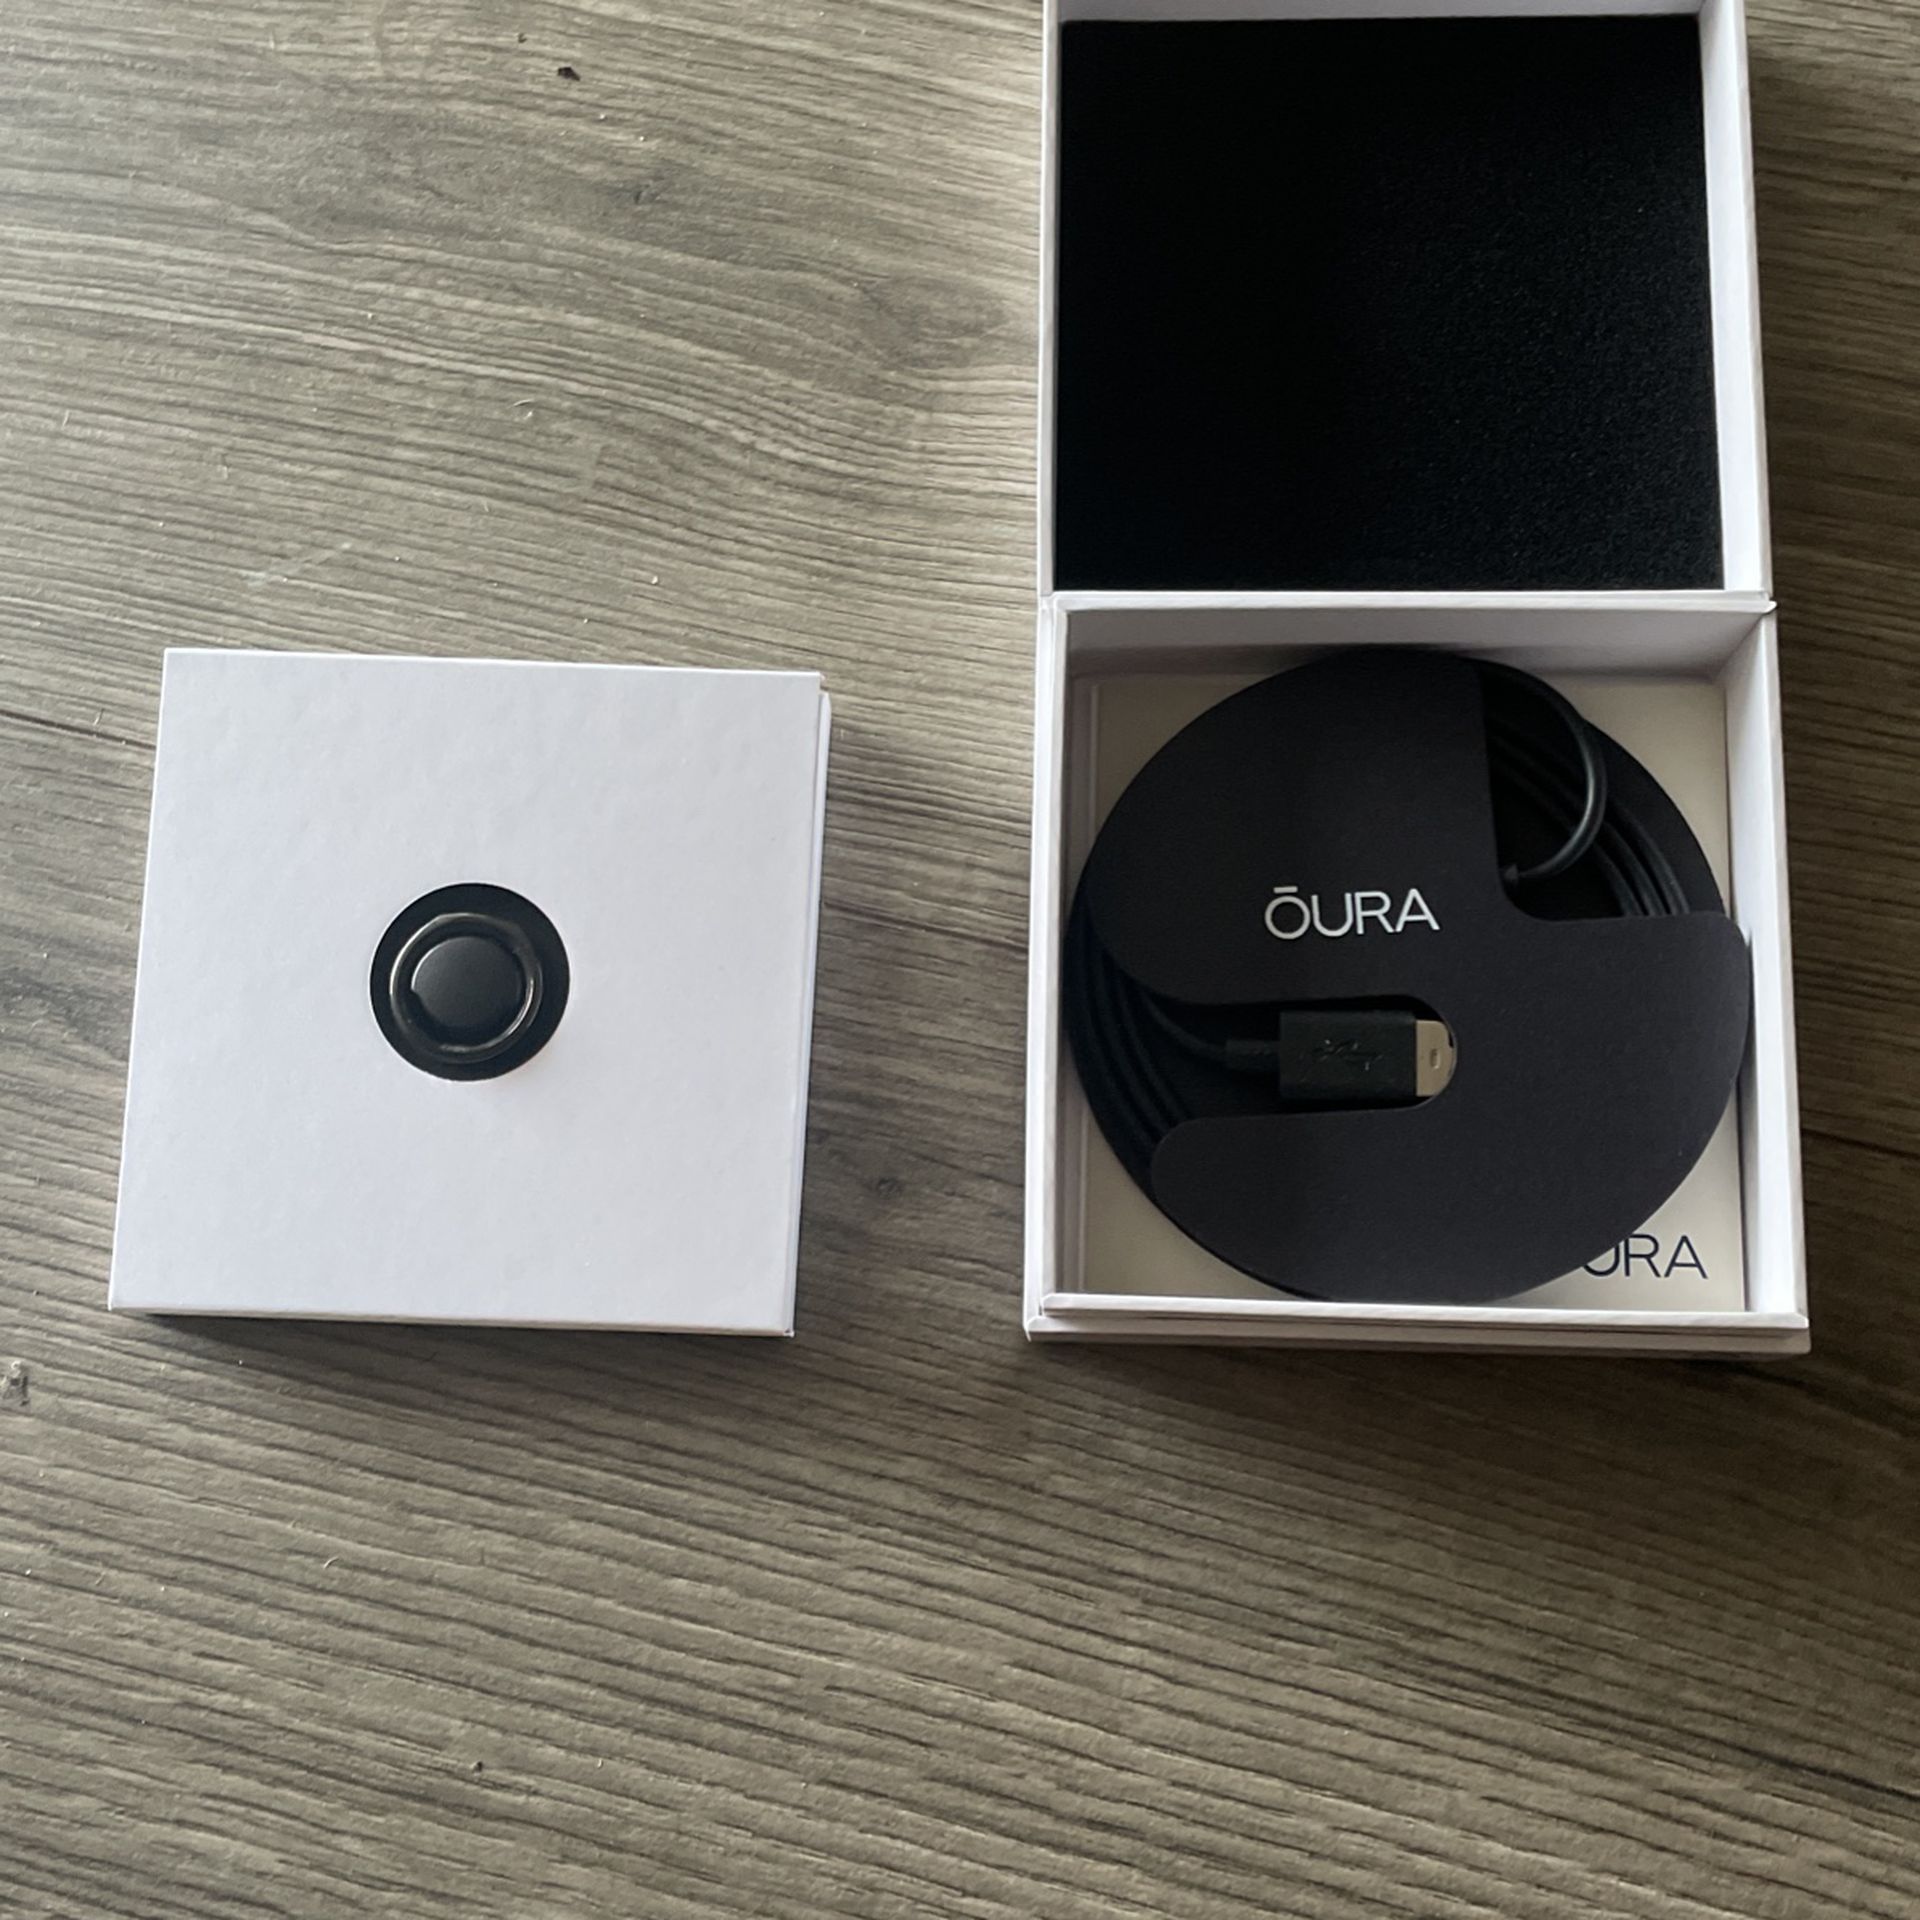 Oura Gen3 Heritage Black Size 7 Smart Ring Price Is TONIGHT ONLY